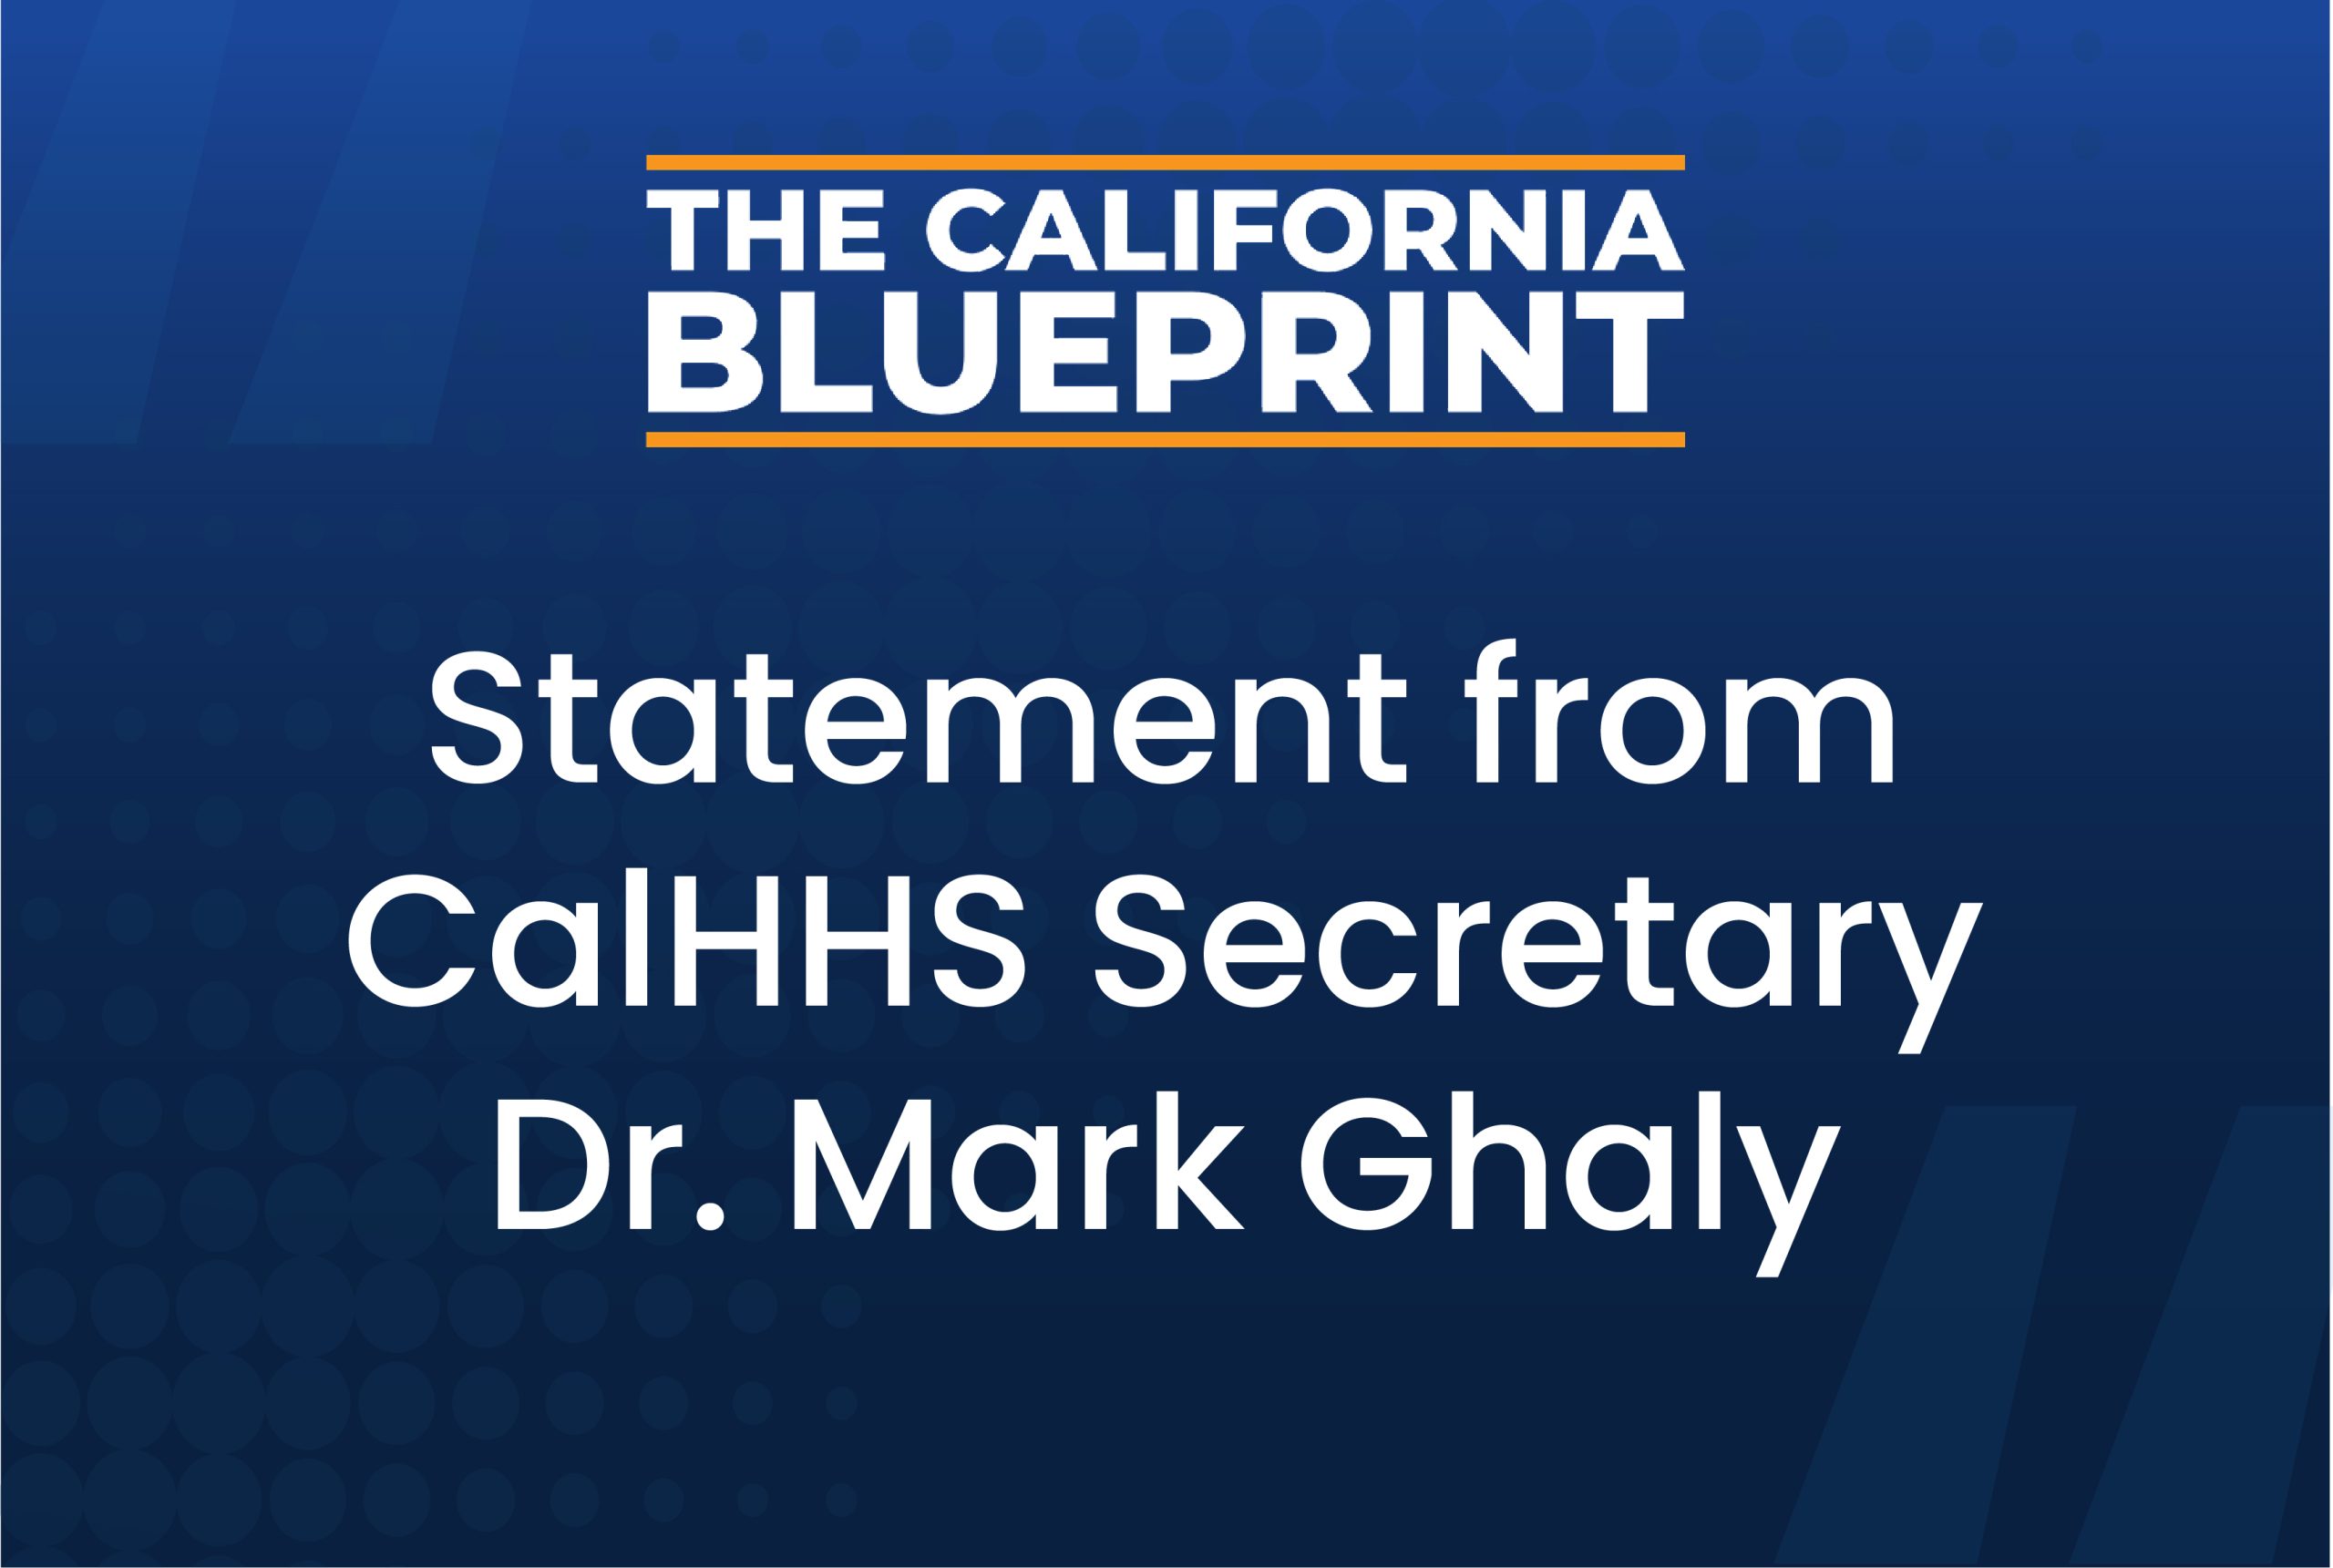 Statement from CalHHS Secretary Dr. Mark Ghaly